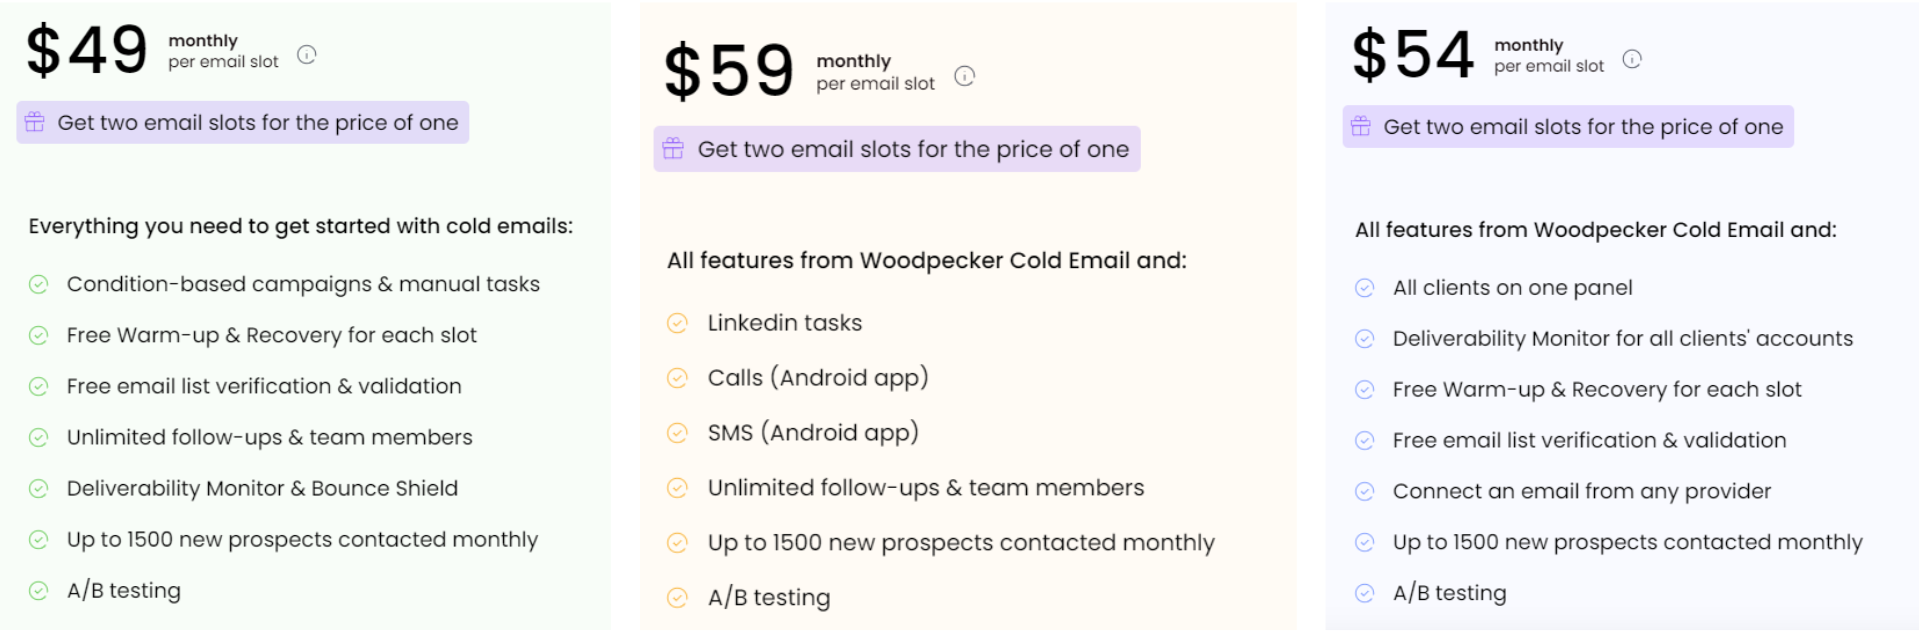 Woodpecker updated pricing